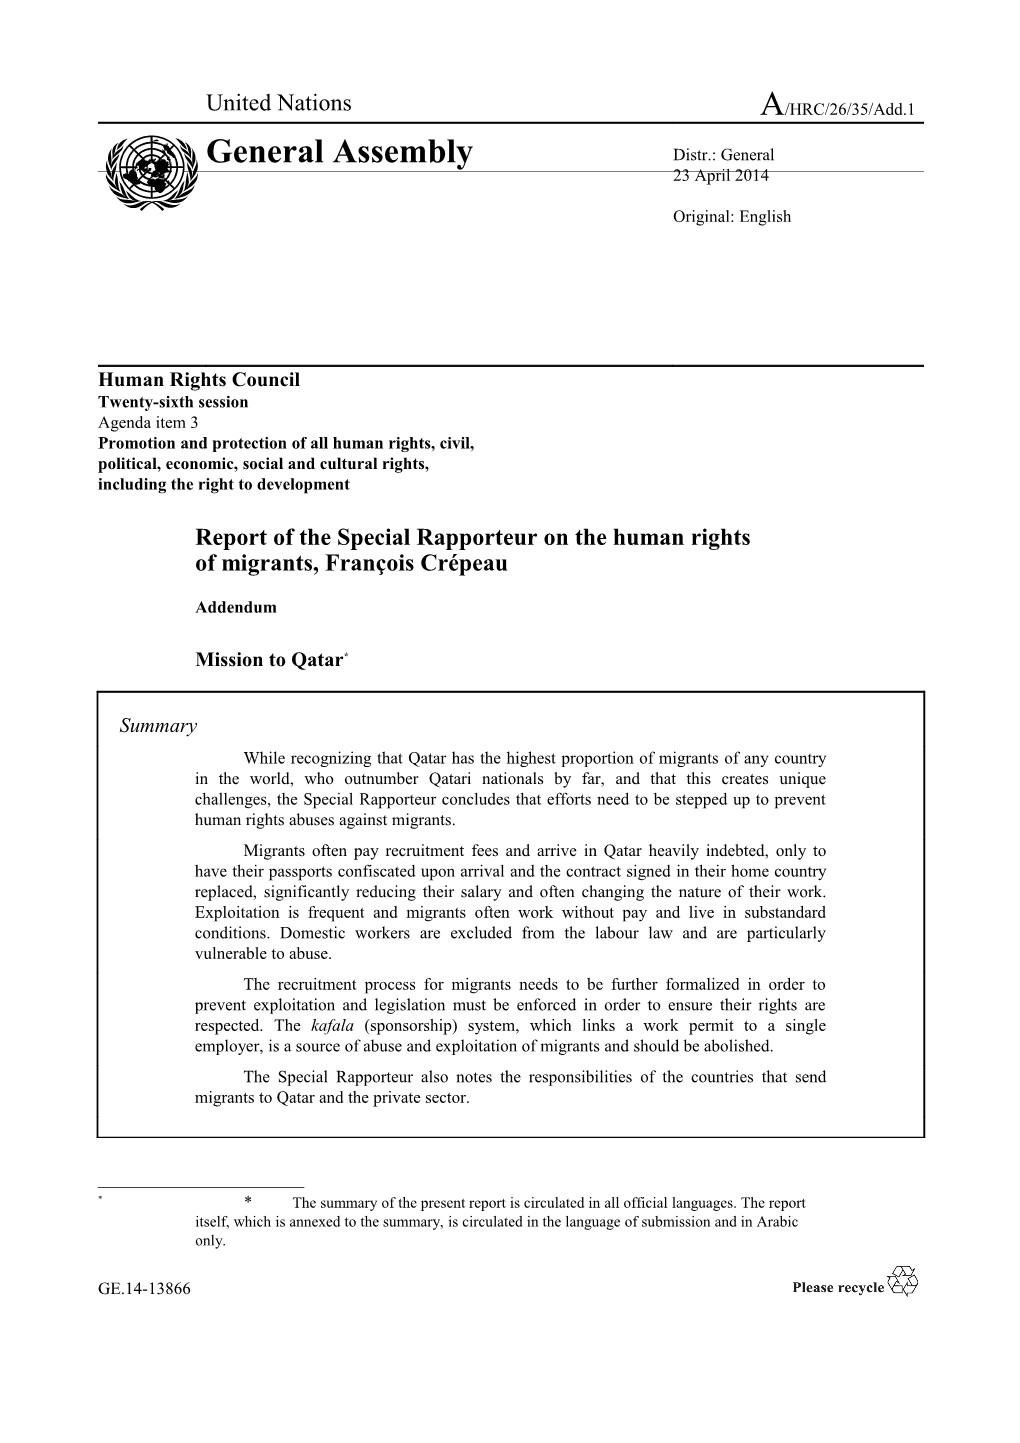 Report of the Special Rapporteur on the Human Rights of Migrants - Mission to Qatar in English